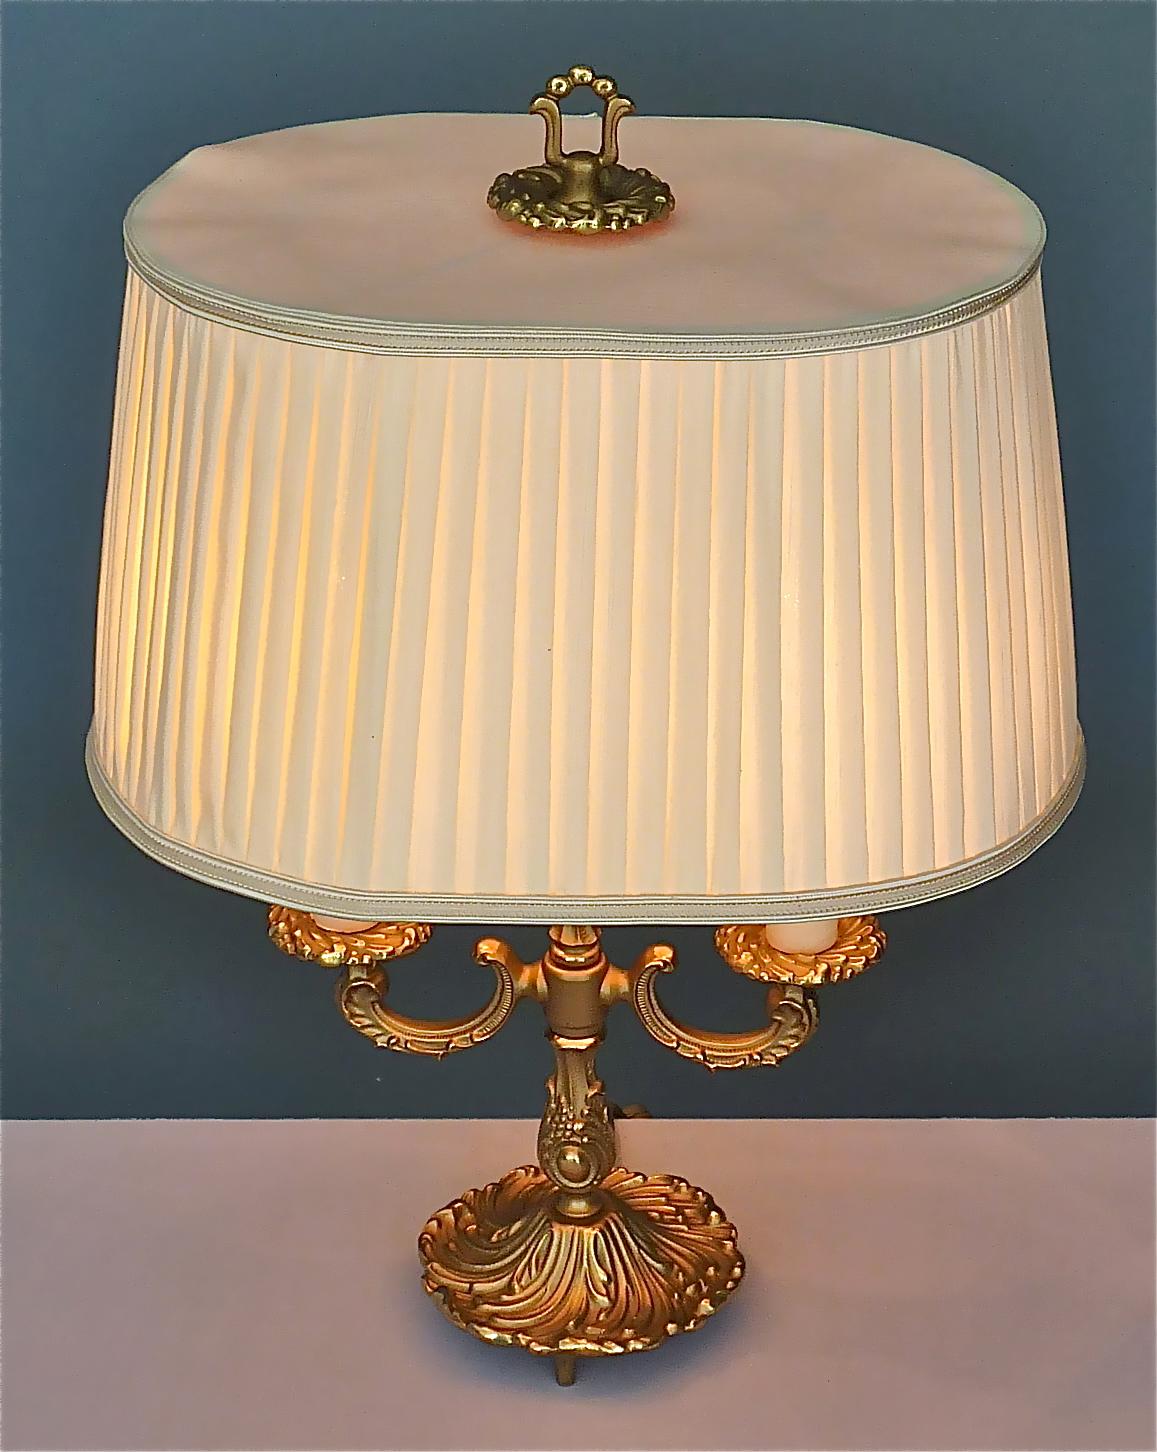 Baroque Maison Jansen Style Midcentury Table Lamp Brass Leaf Decor Germany 1950s For Sale 2